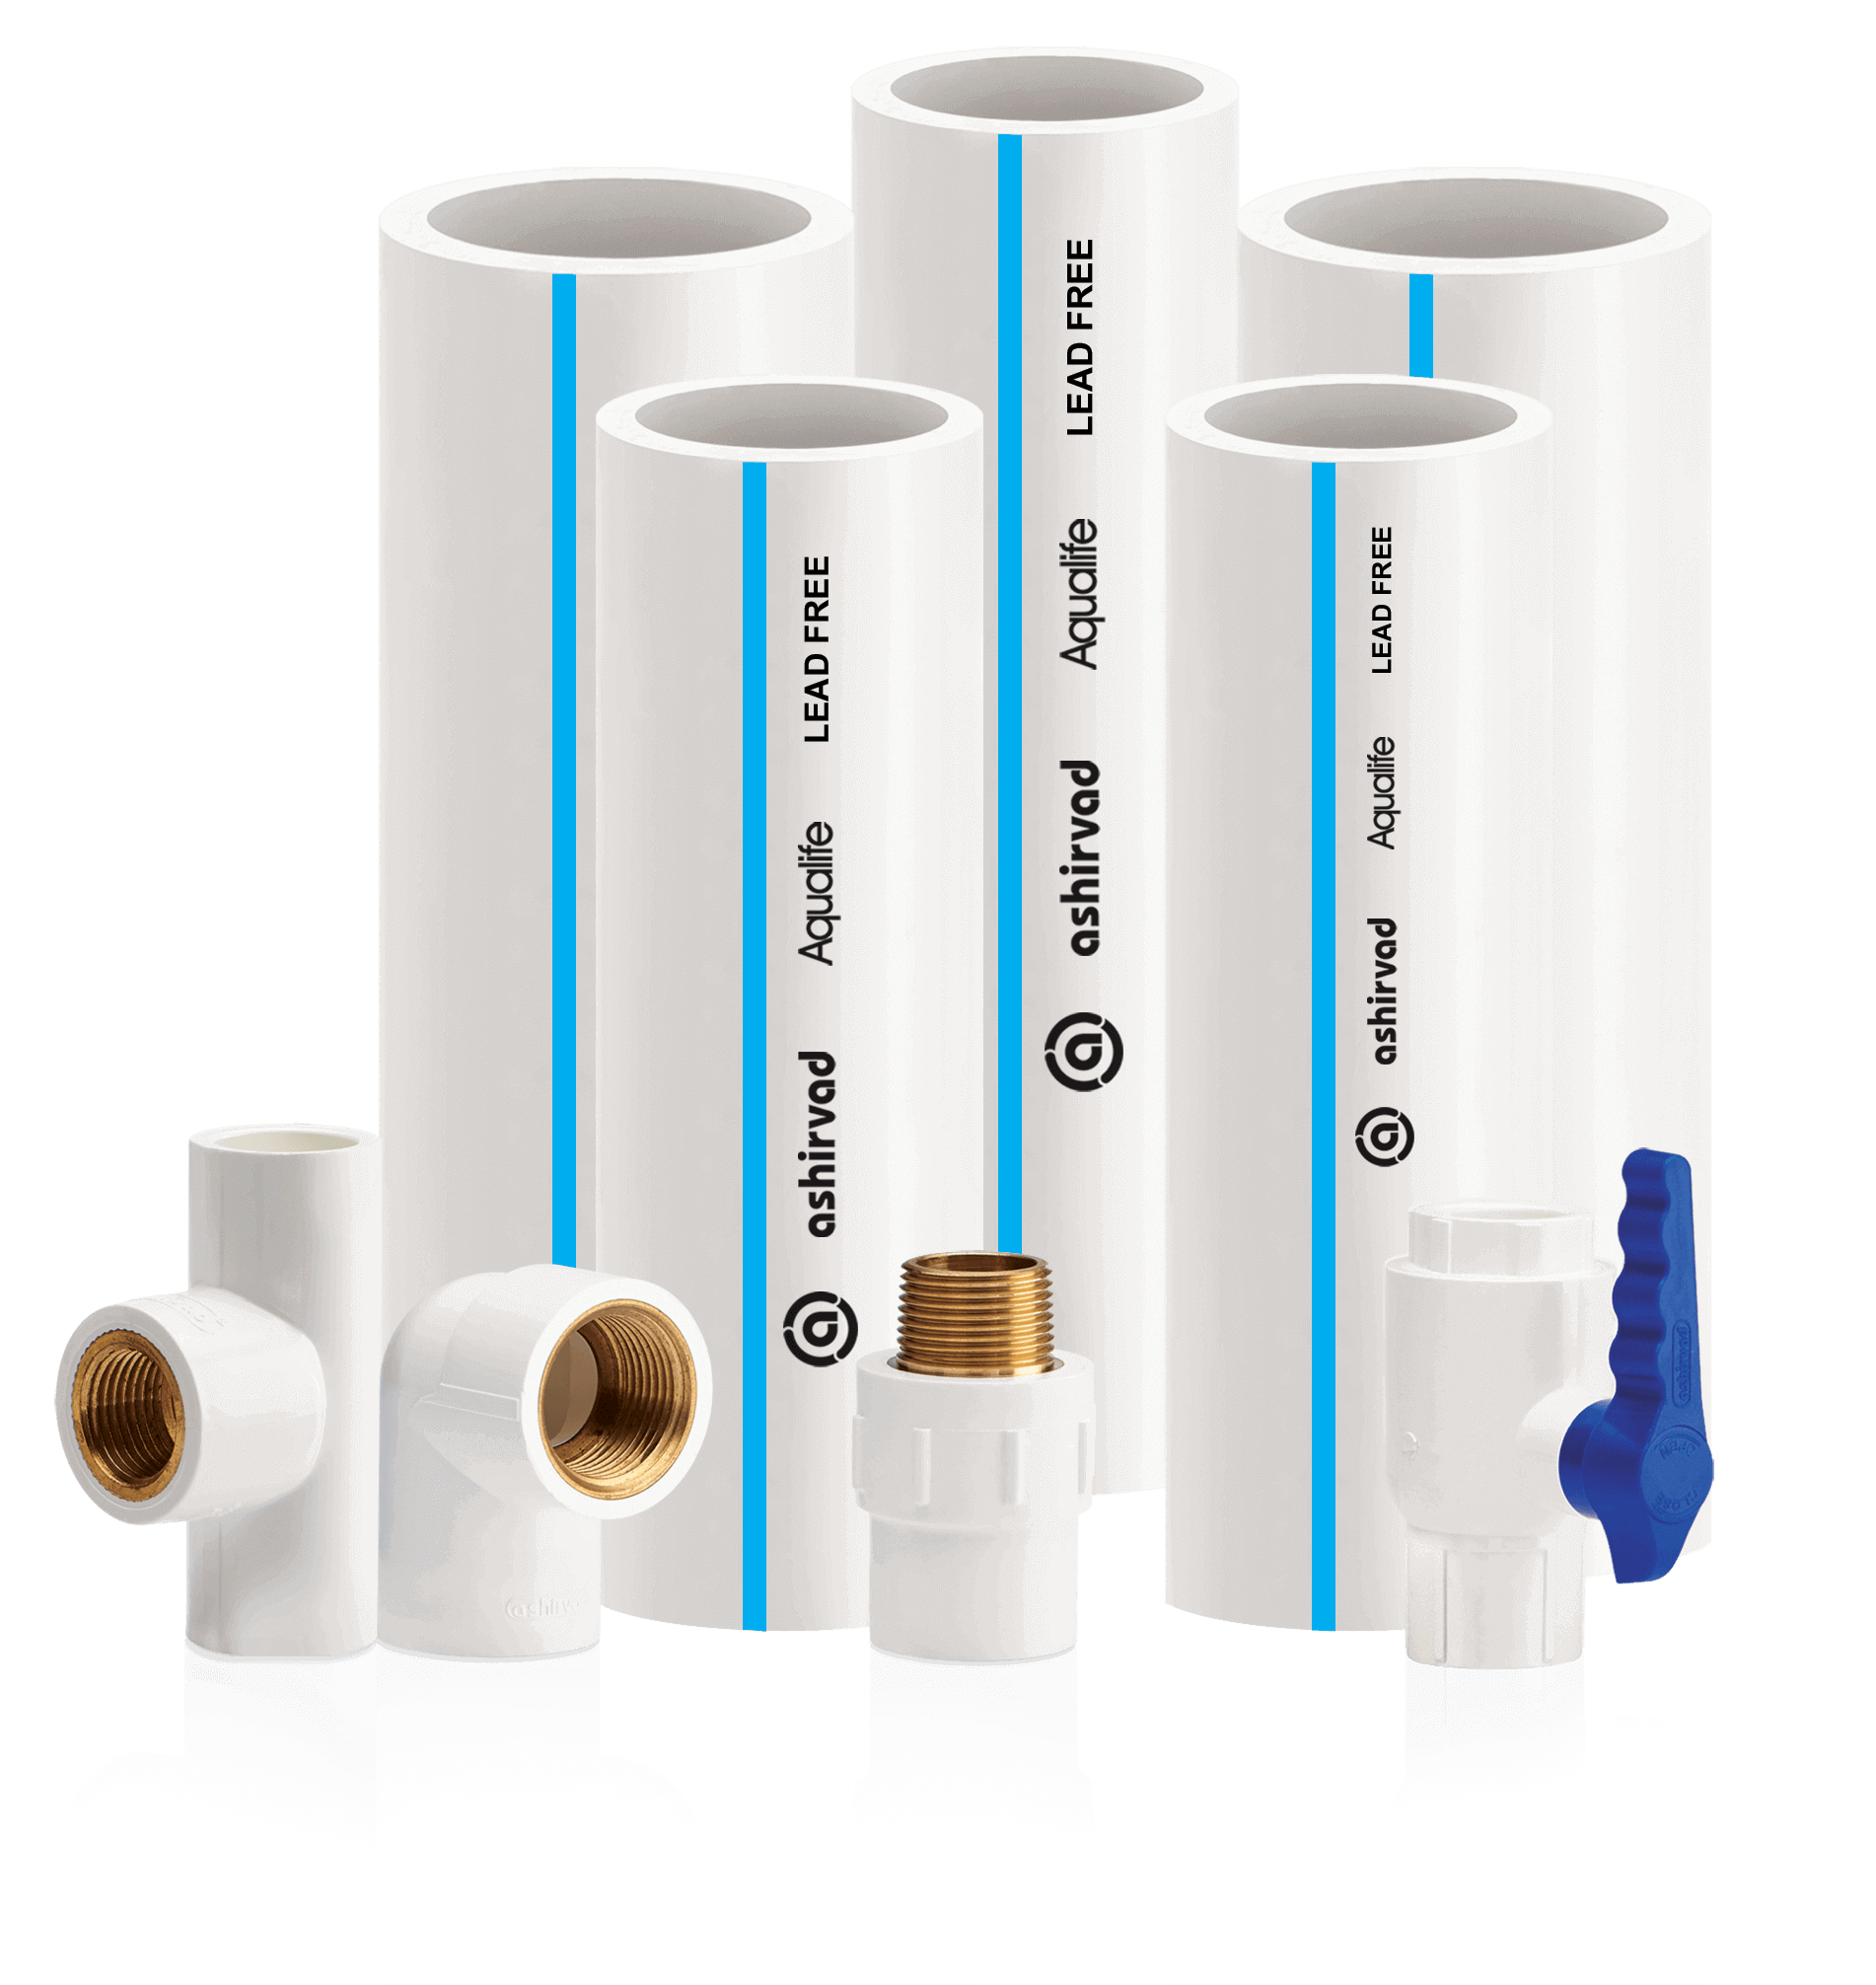 Ashirvad UPVC Plumbing Pipes and Fittings